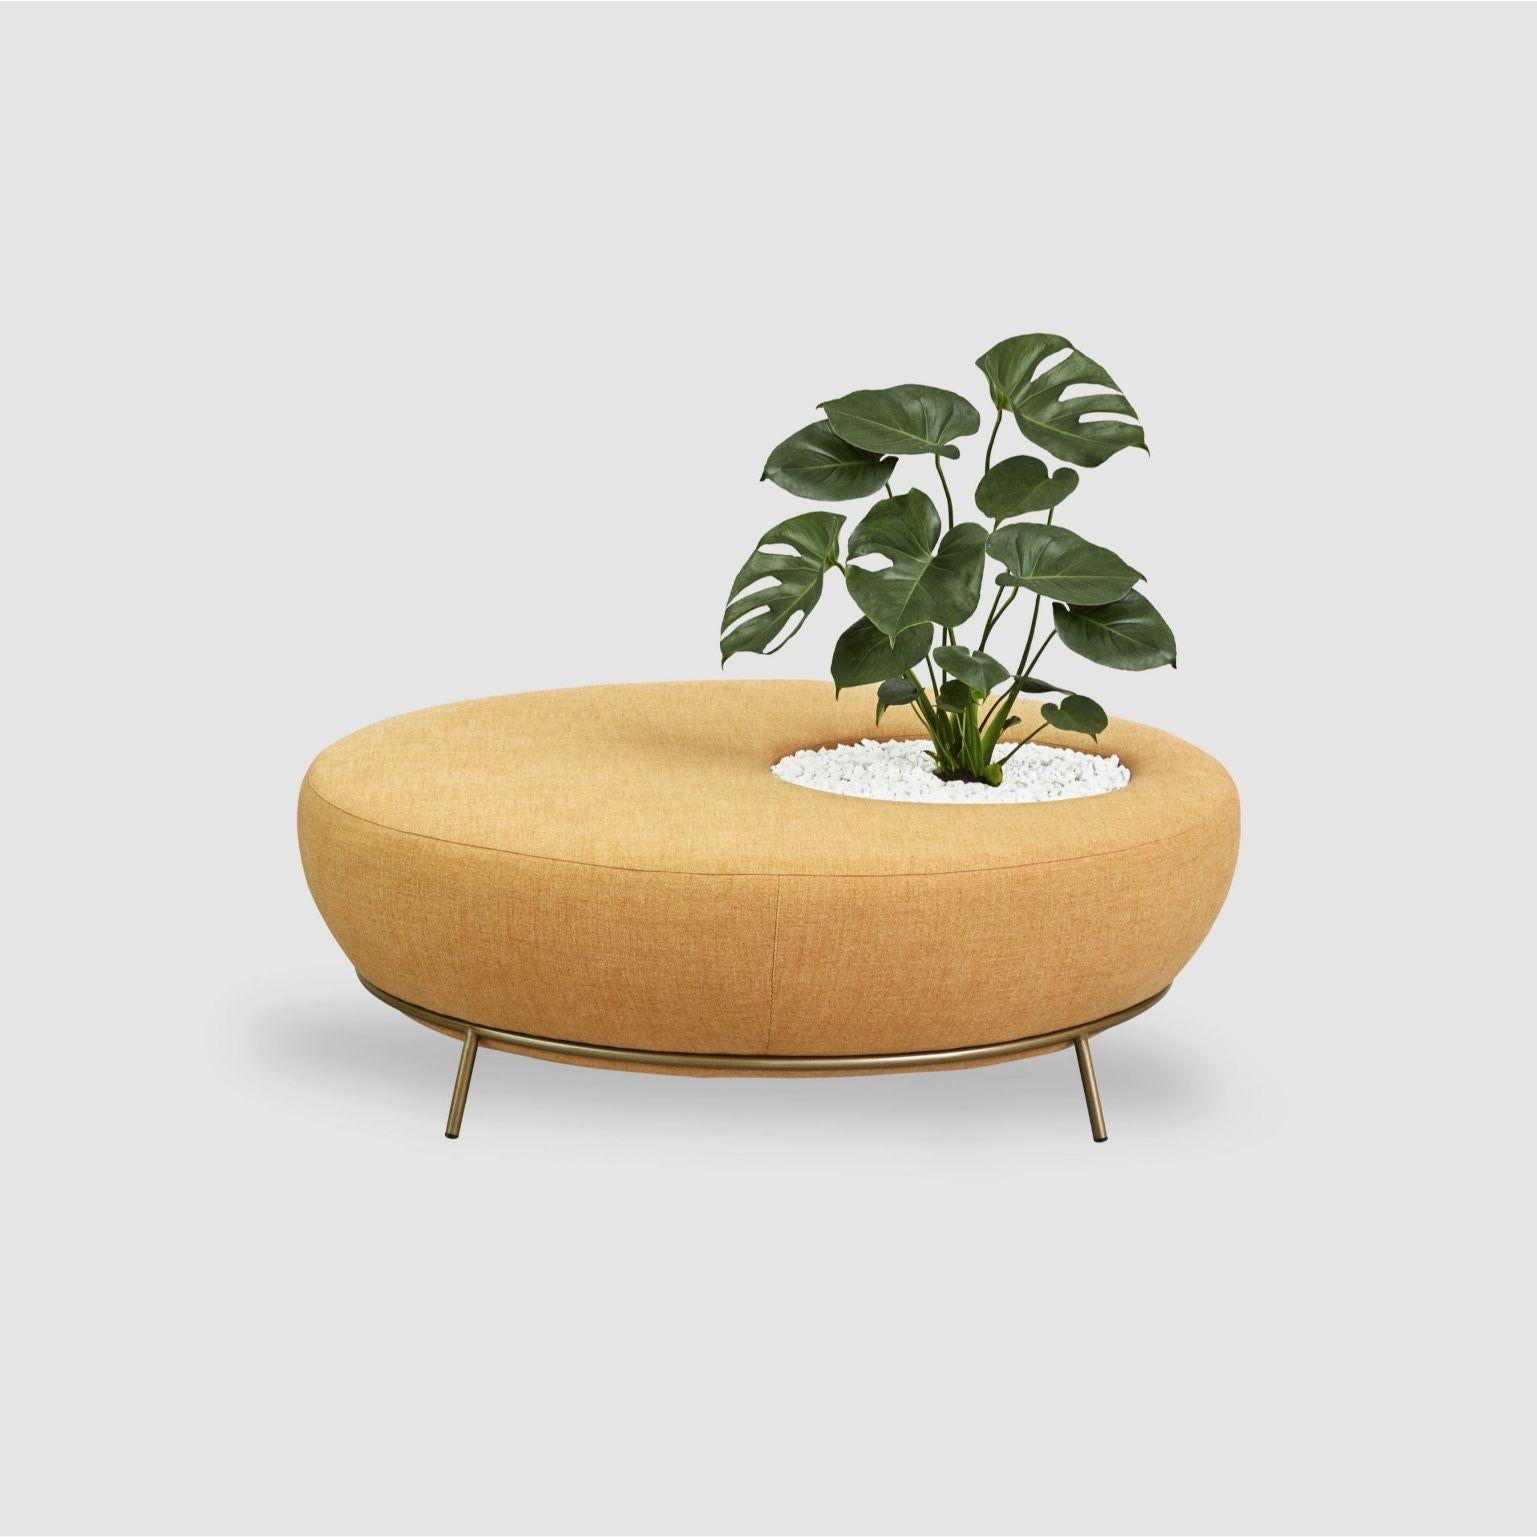 Nest round sofa planter by Pepe Albargues
Dimensions: W140, D140, H44
Materials: Iron structure and MDF board
Foam CMHR (high resilience and flame retardant) for all our cushion filling systems
Painted or chromed legs
Stainless steel